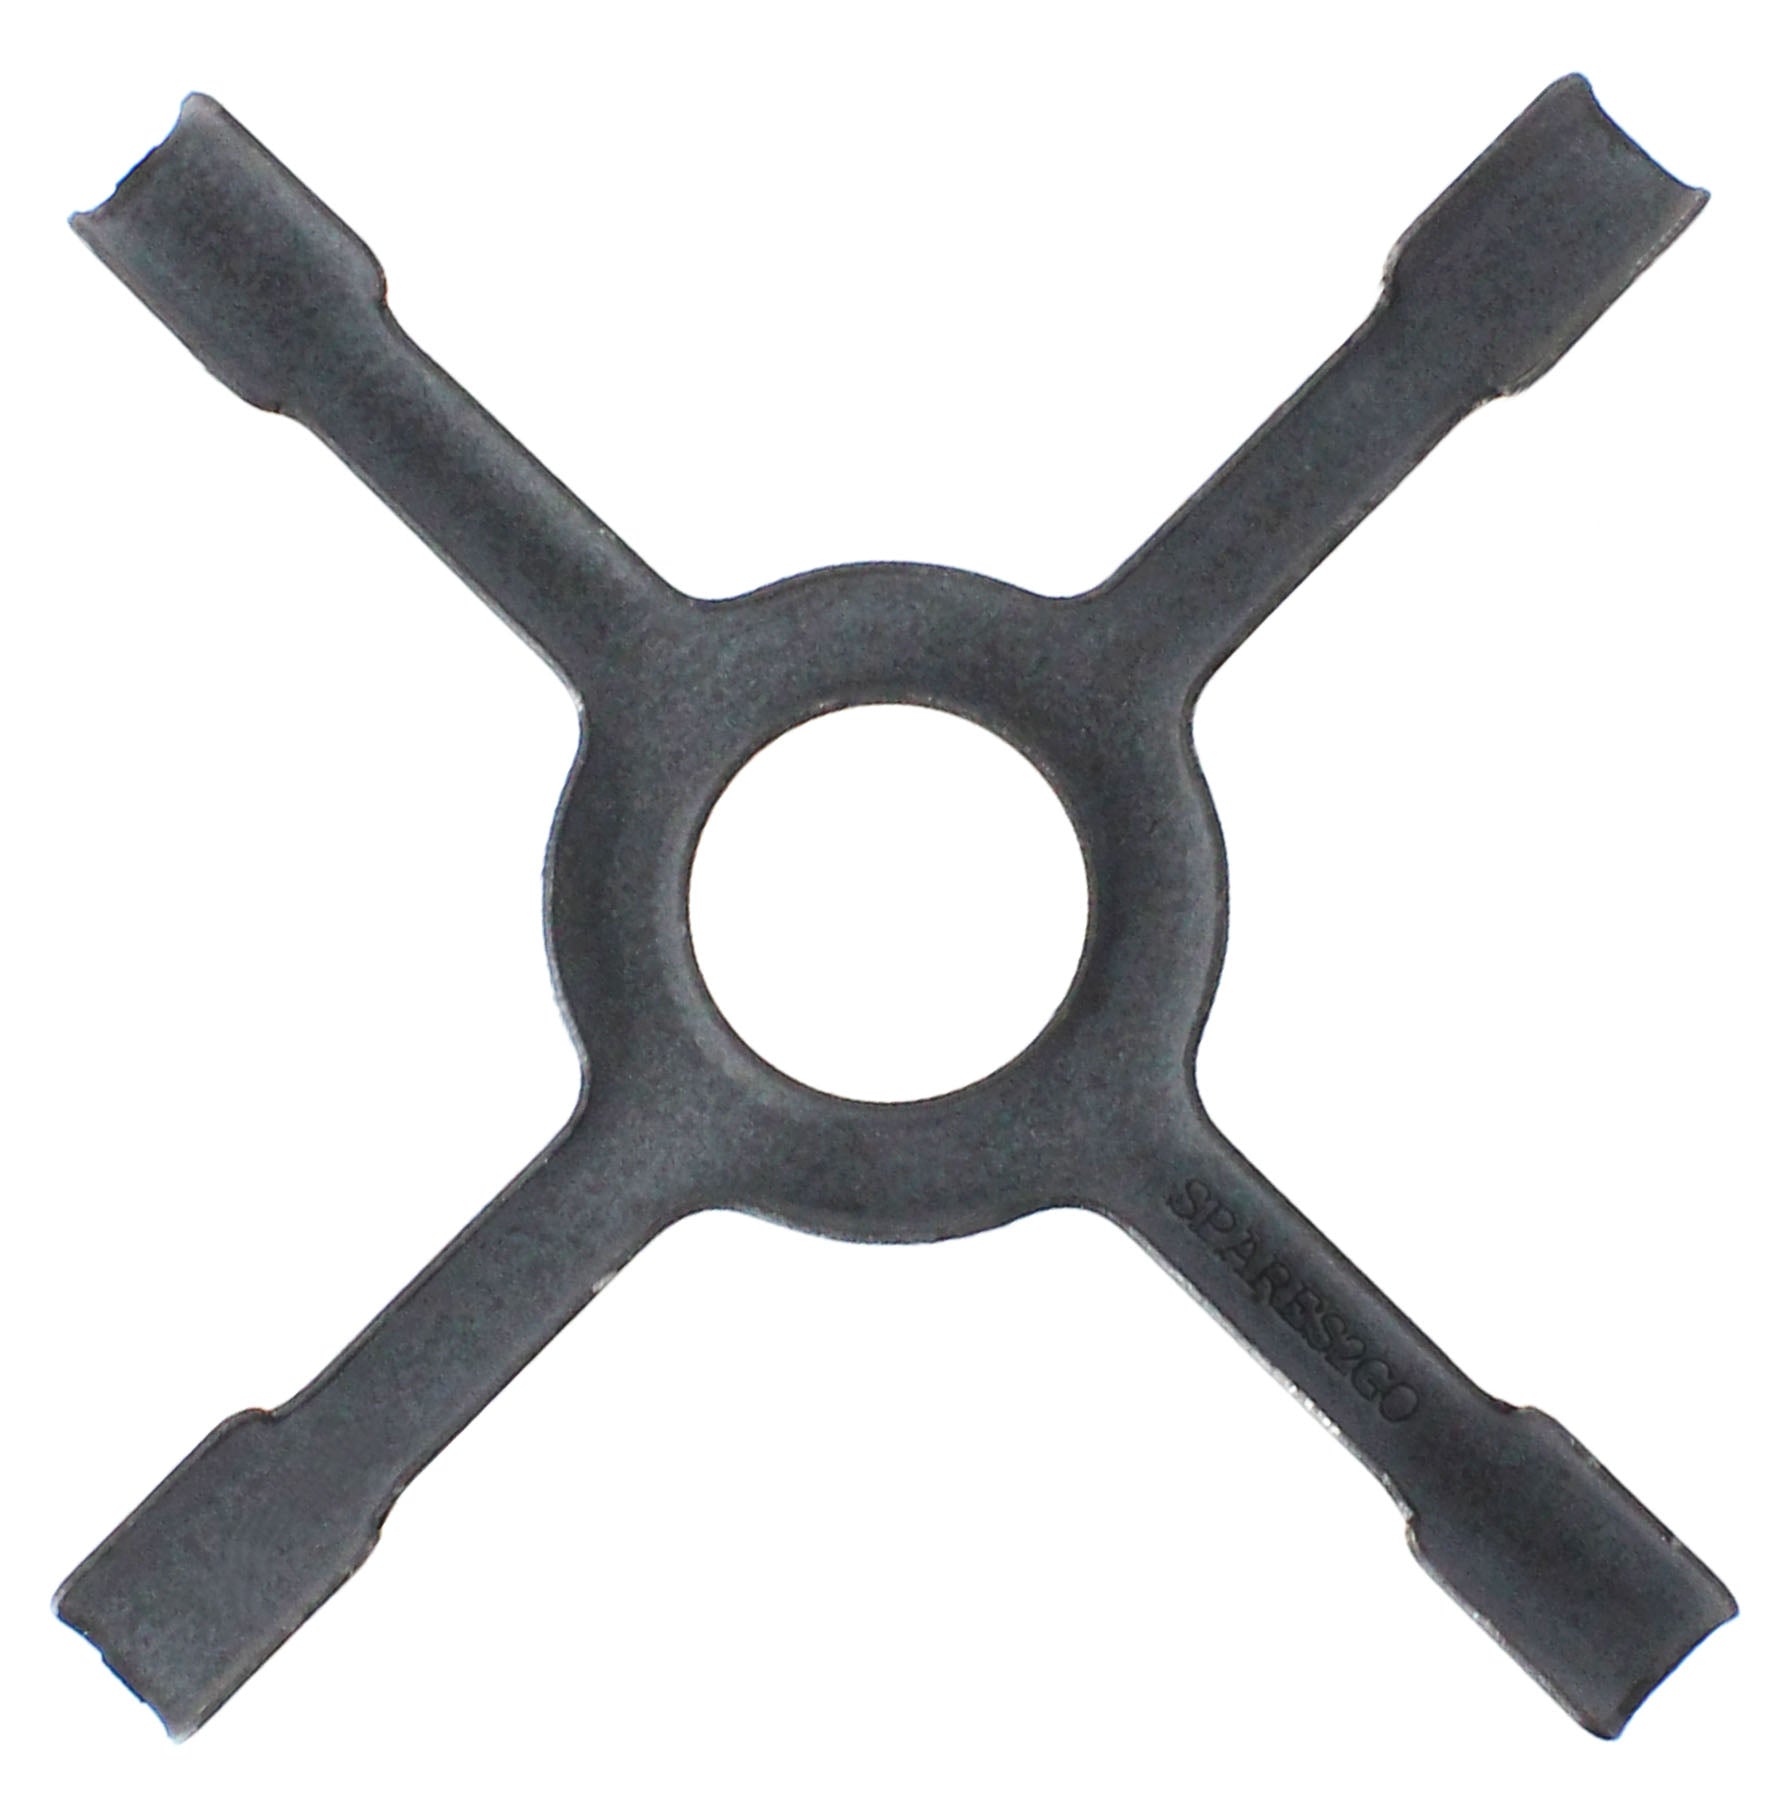 Universal Gas Hob Ceramic Pan Support Moka Trivet Coffee Pot Stand (Pack of 2, Small 130mm)